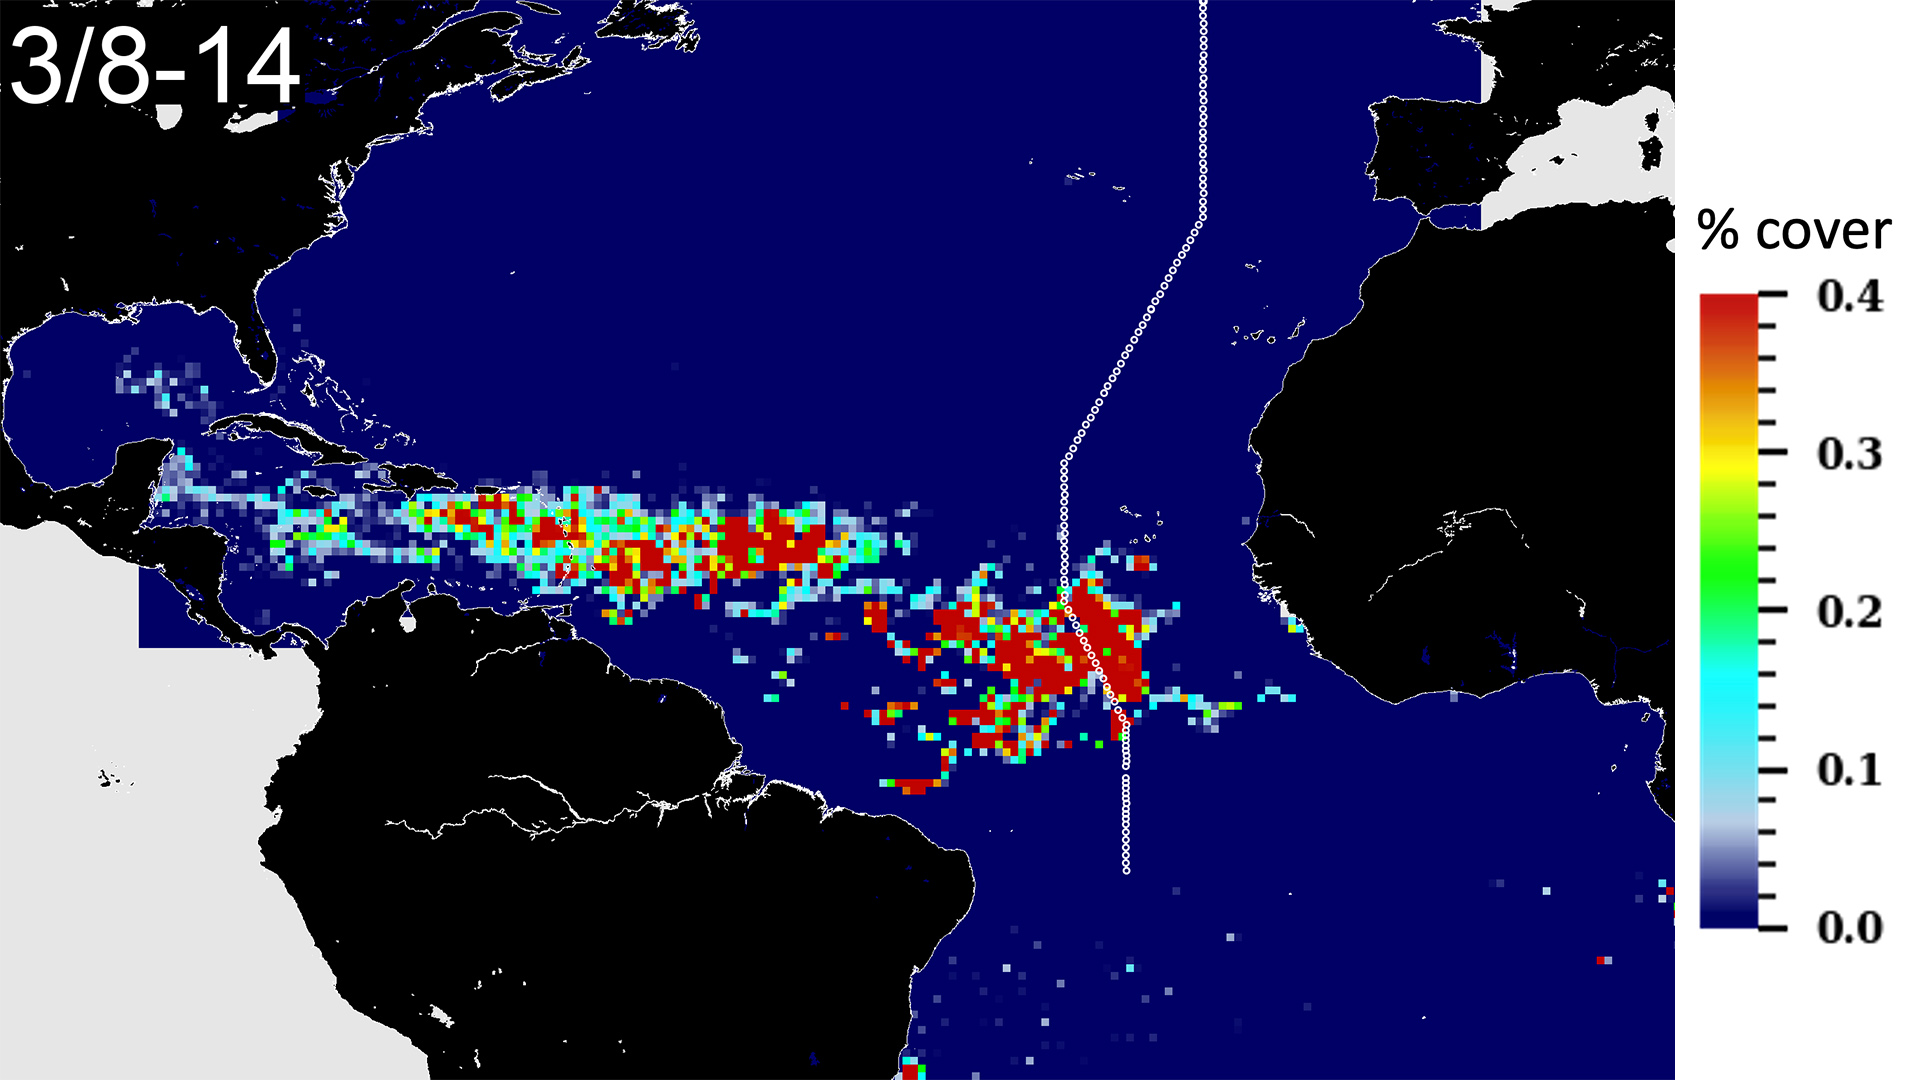 Fraction of Sargassum coverage from satellite measurements with cruise track overlaid (circles). Red indicates a higher fraction of coverage. (Optical Oceanography Lab at University of South Florida College of Marine Science (https://optics.marine.usf.edu/projects/saws.html)